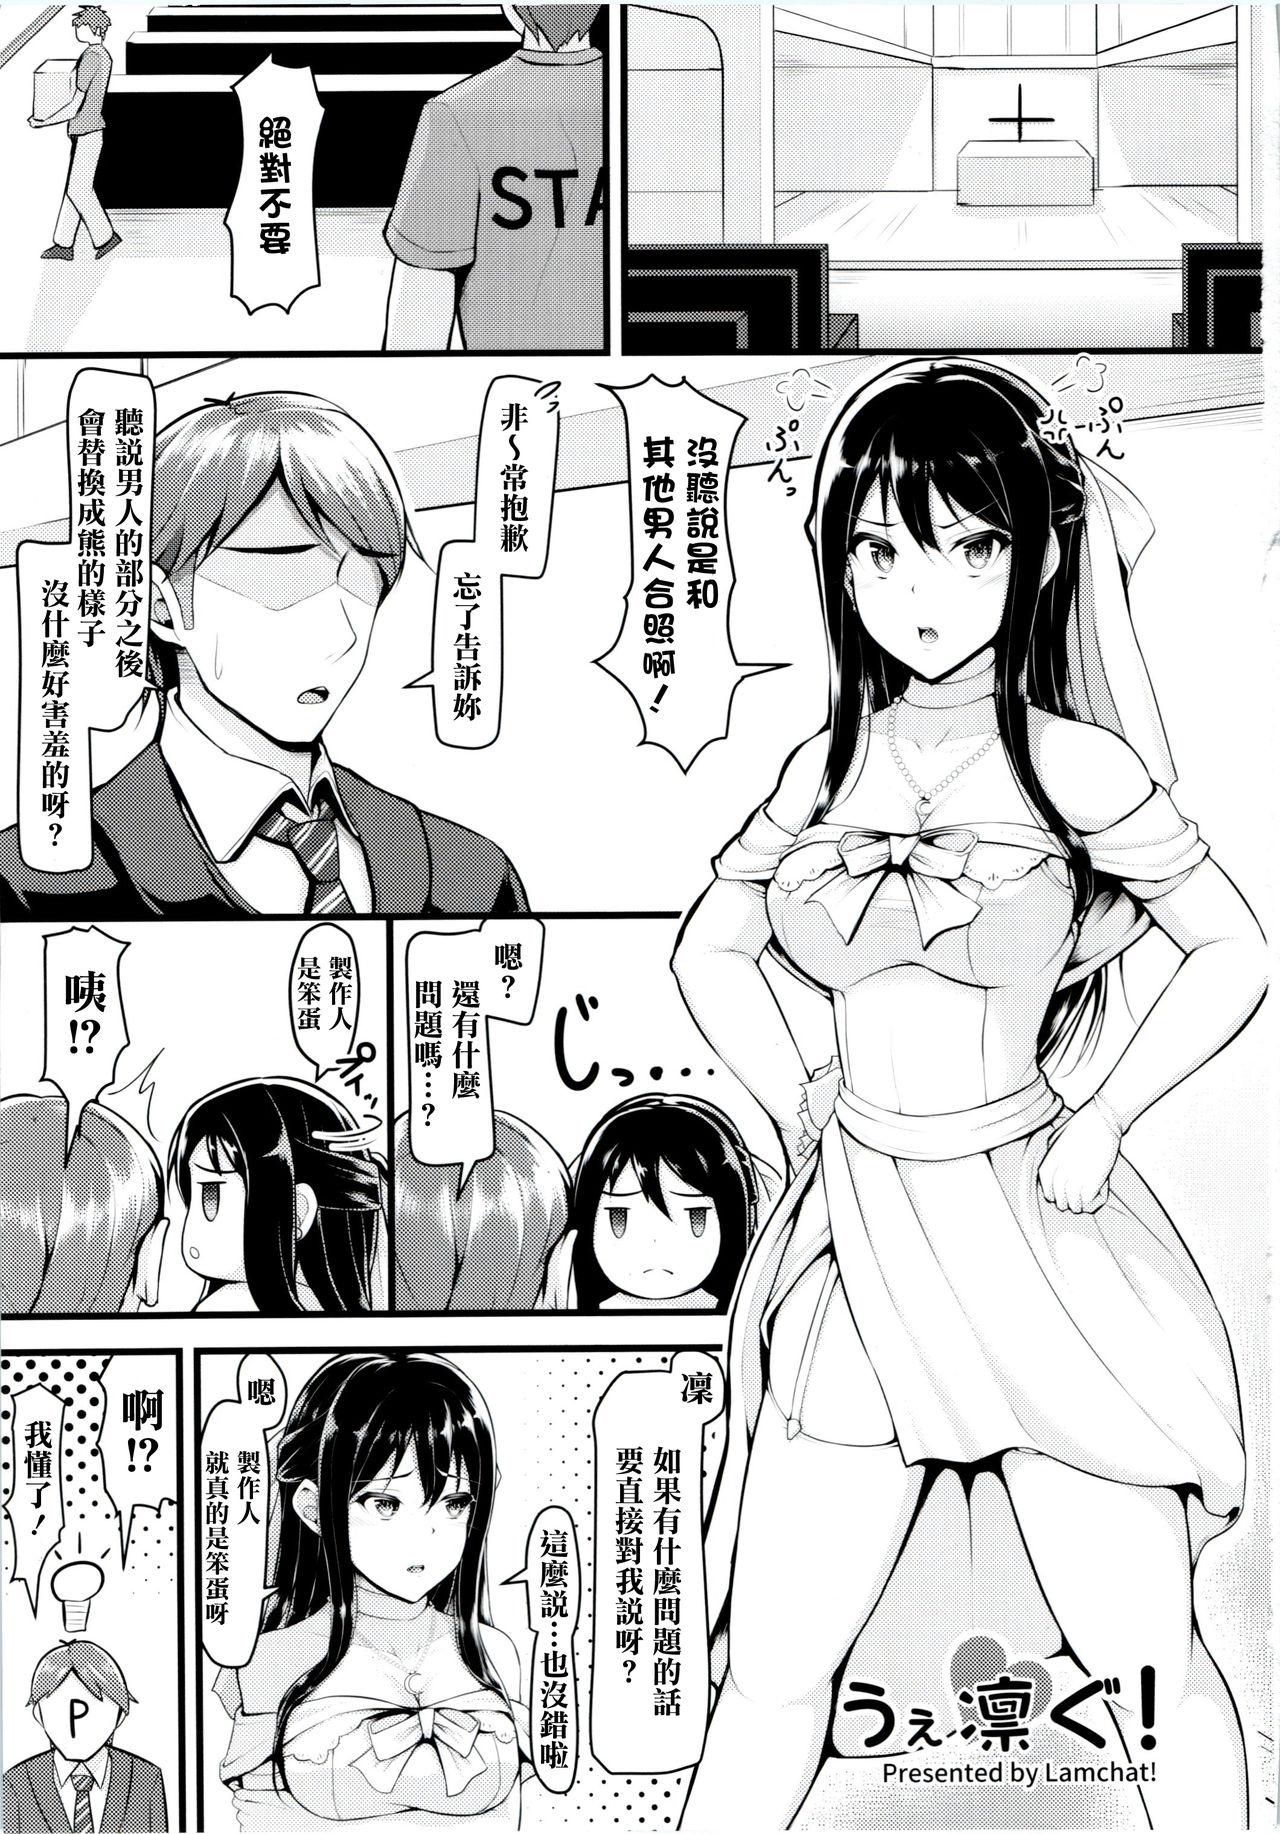 Foot Fetish (Utahime Teien 13) [Lamchat! (Lamcha)] Wed-rin-g! (THE IDOLM@STER CINDERELLA GIRLS) [Chinese] [清純突破漢化組] - The idolmaster Shemale Sex - Page 3